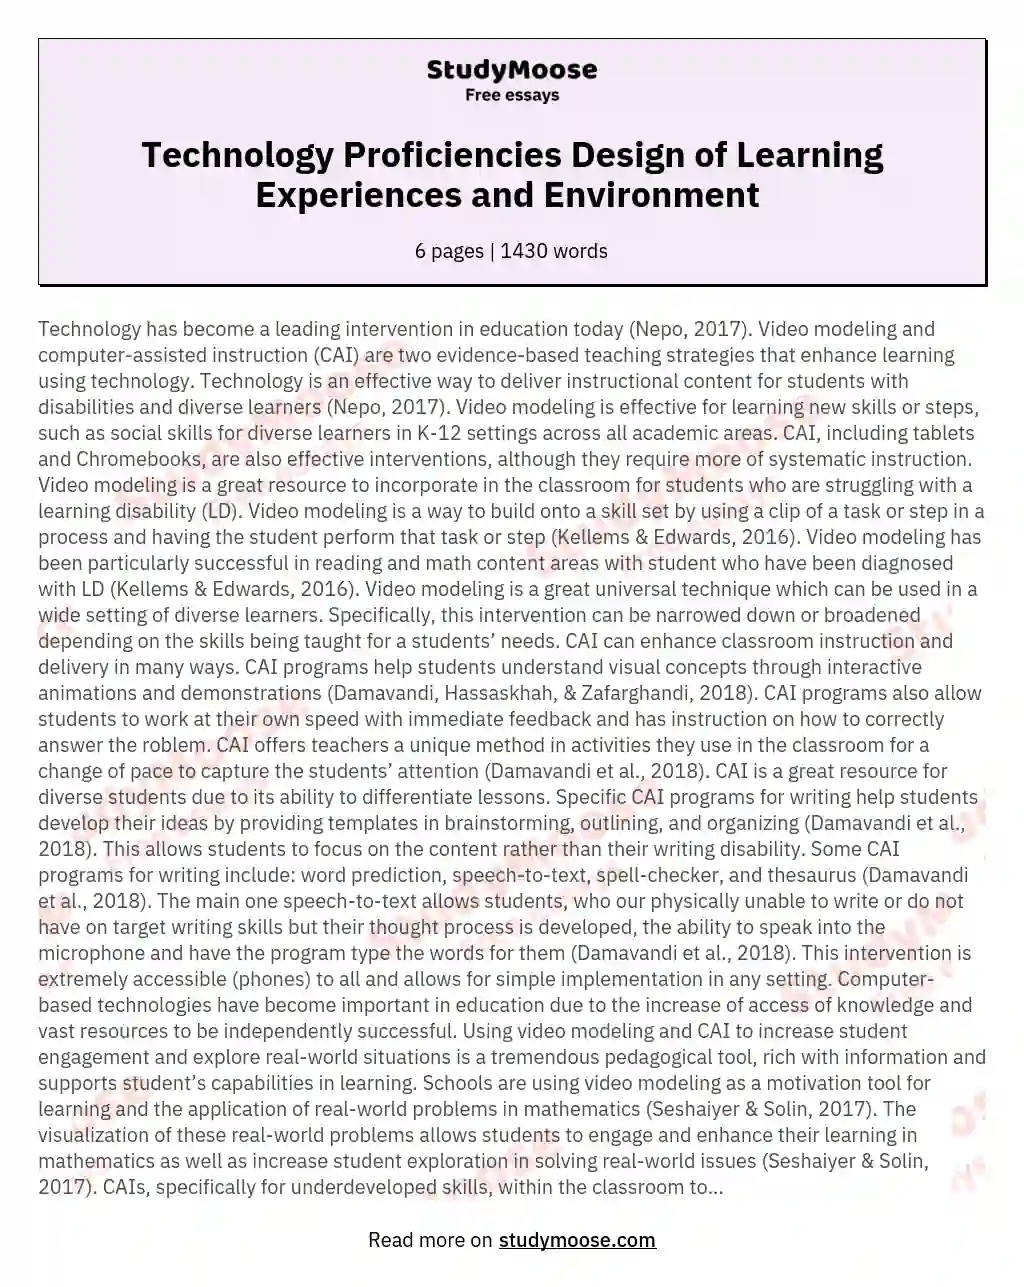 Technology Proficiencies Design of Learning Experiences and Environment  essay